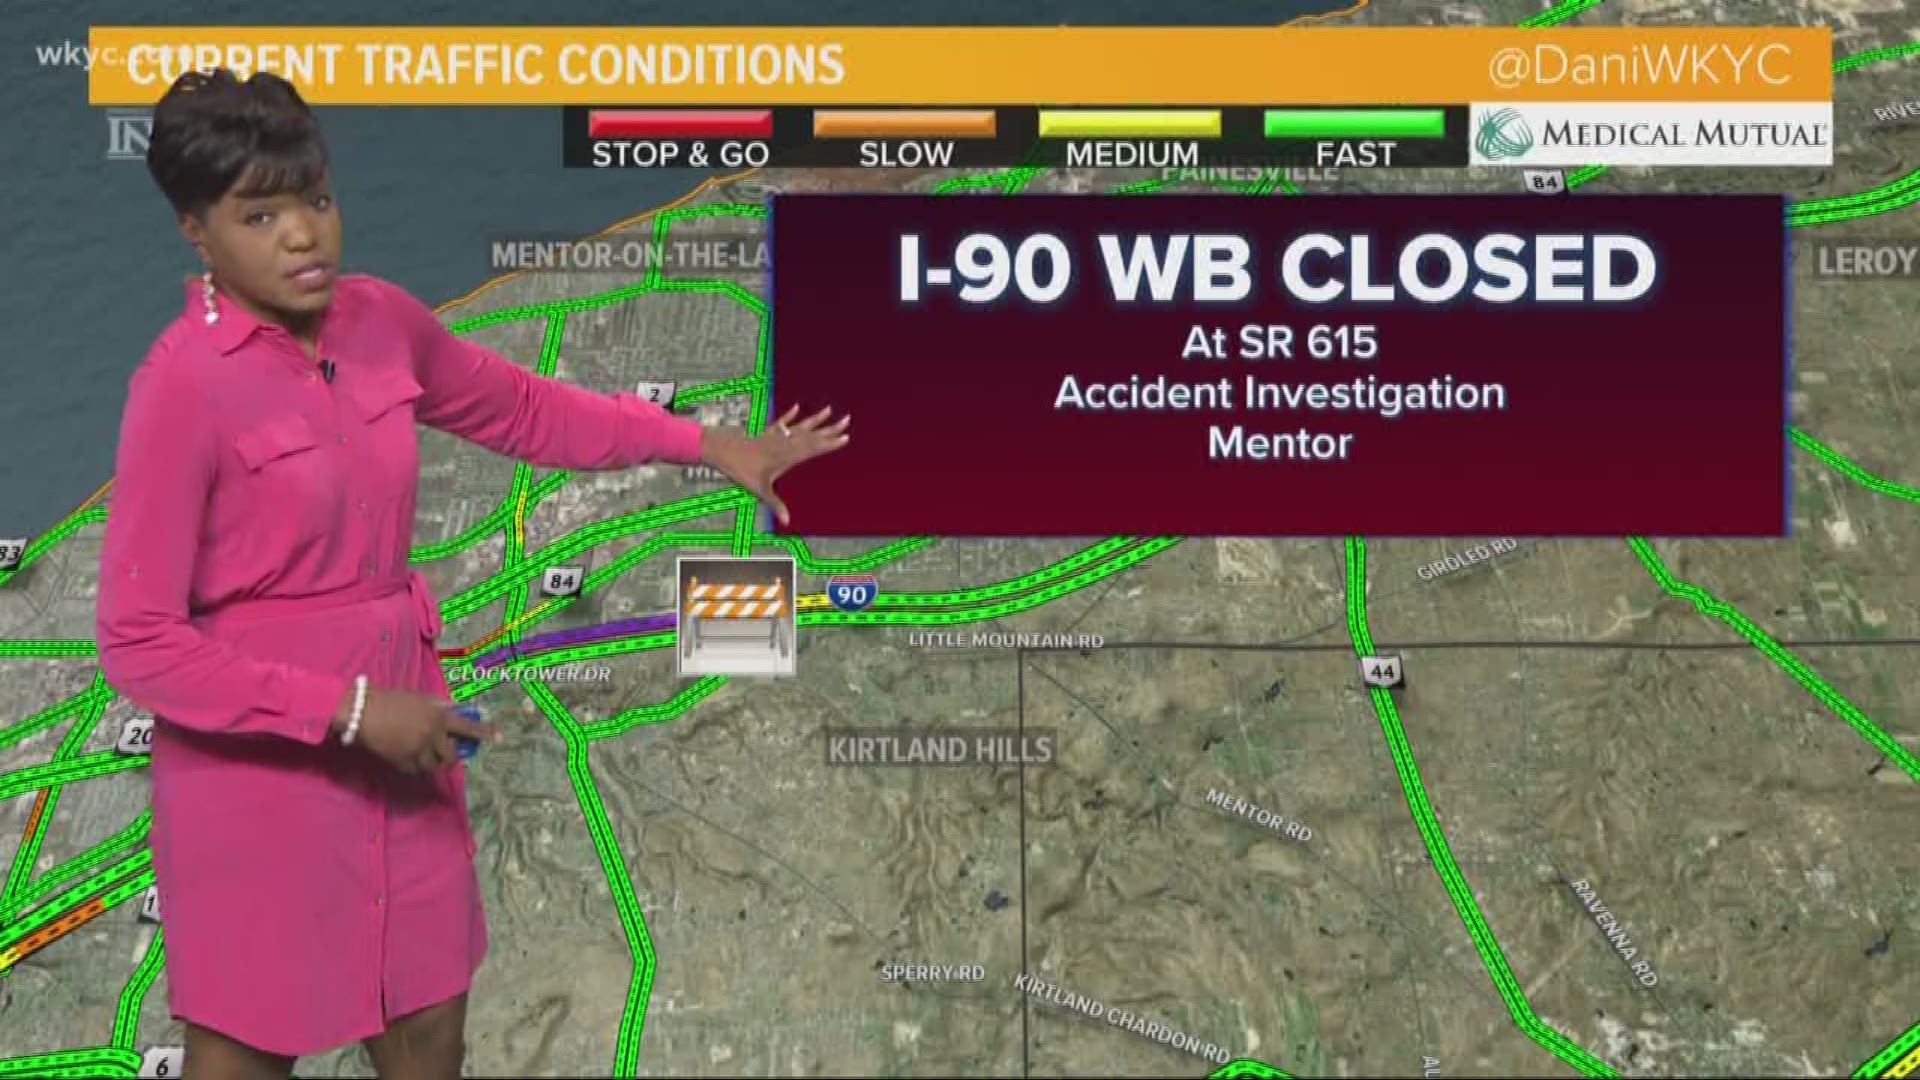 Jan. 25, 2019: Crews have closed all lanes of I-90 West at Route 615 due to a crash investigation.